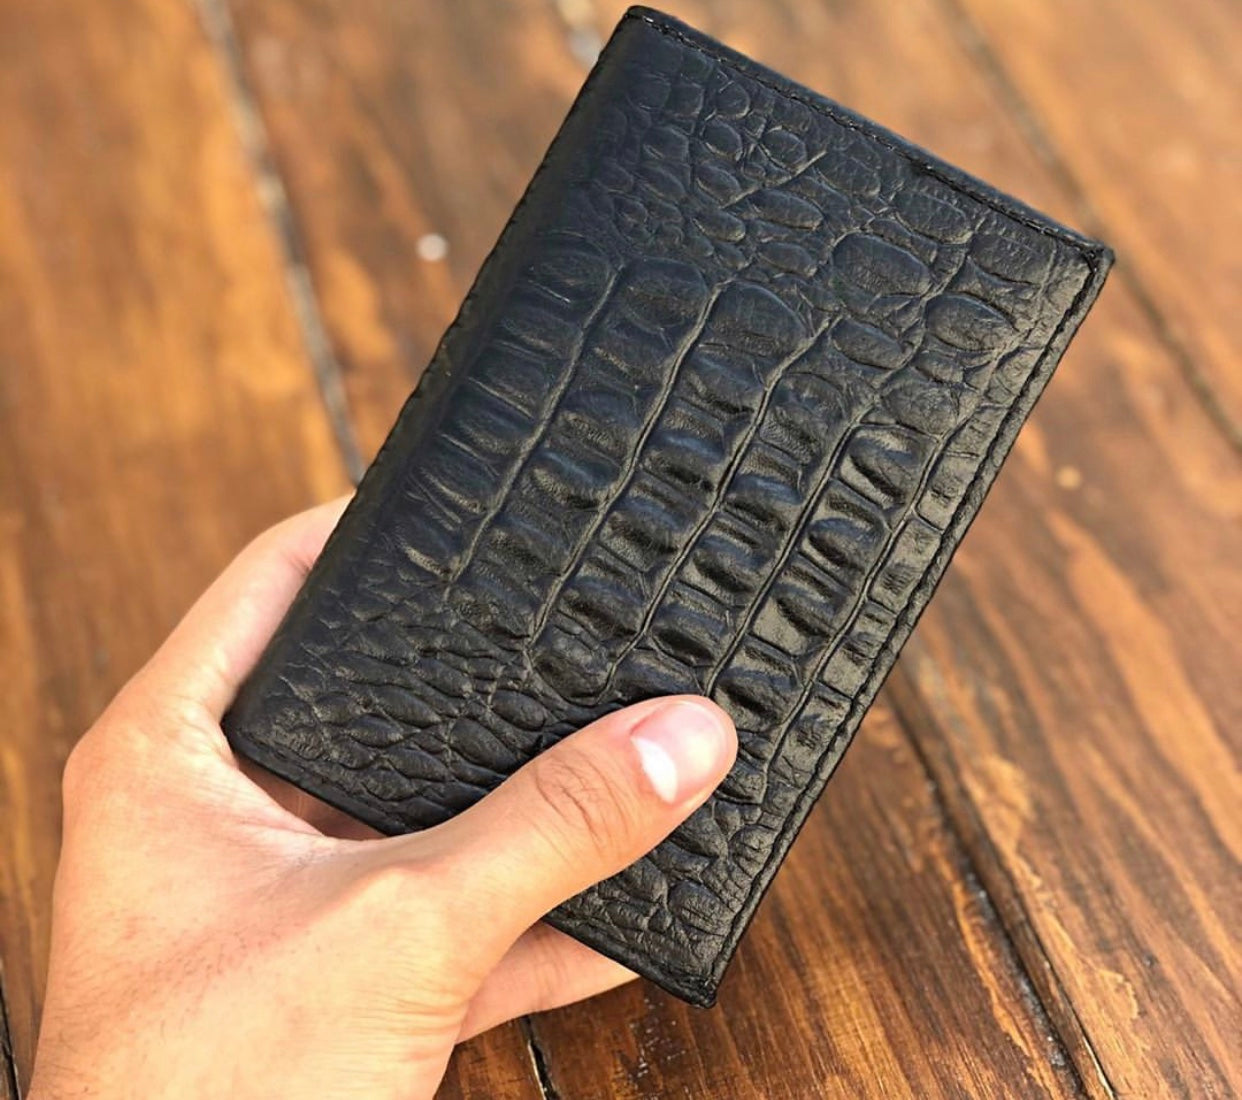 double card holder